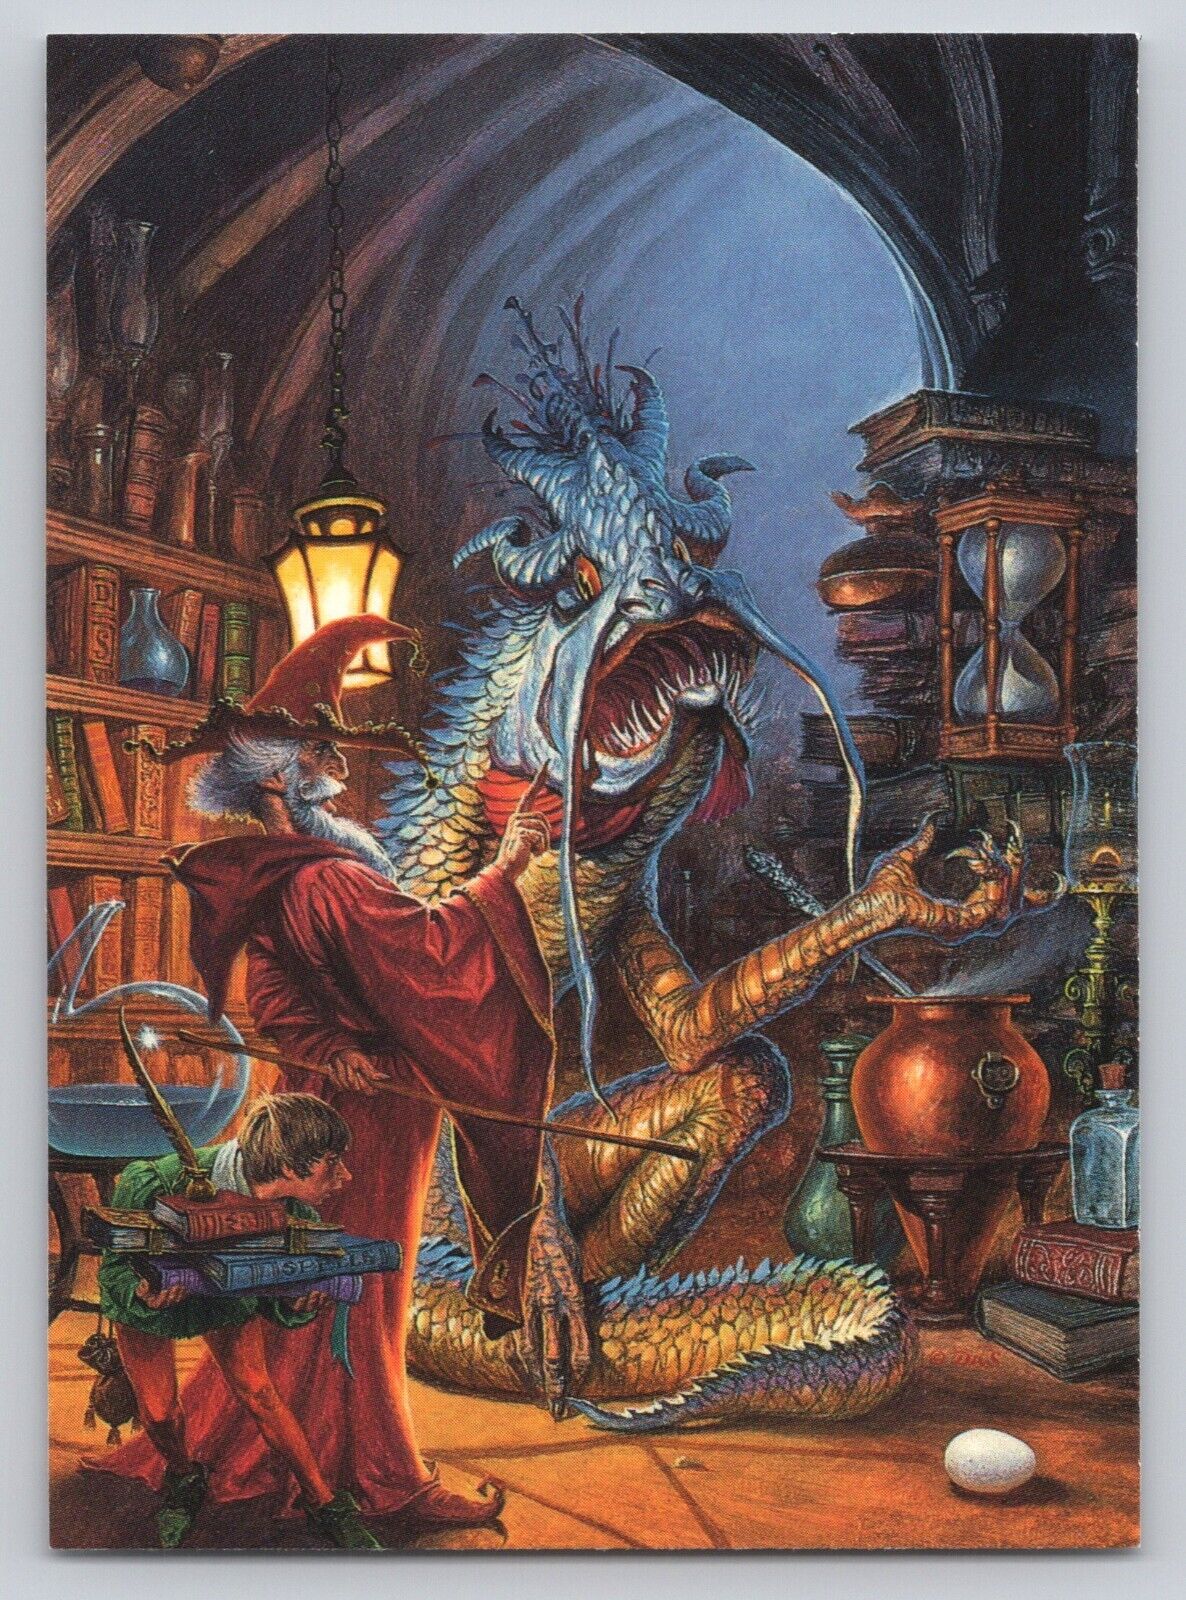 1994 Darrell K. Sweet - #32 But the Instructions are Confusing